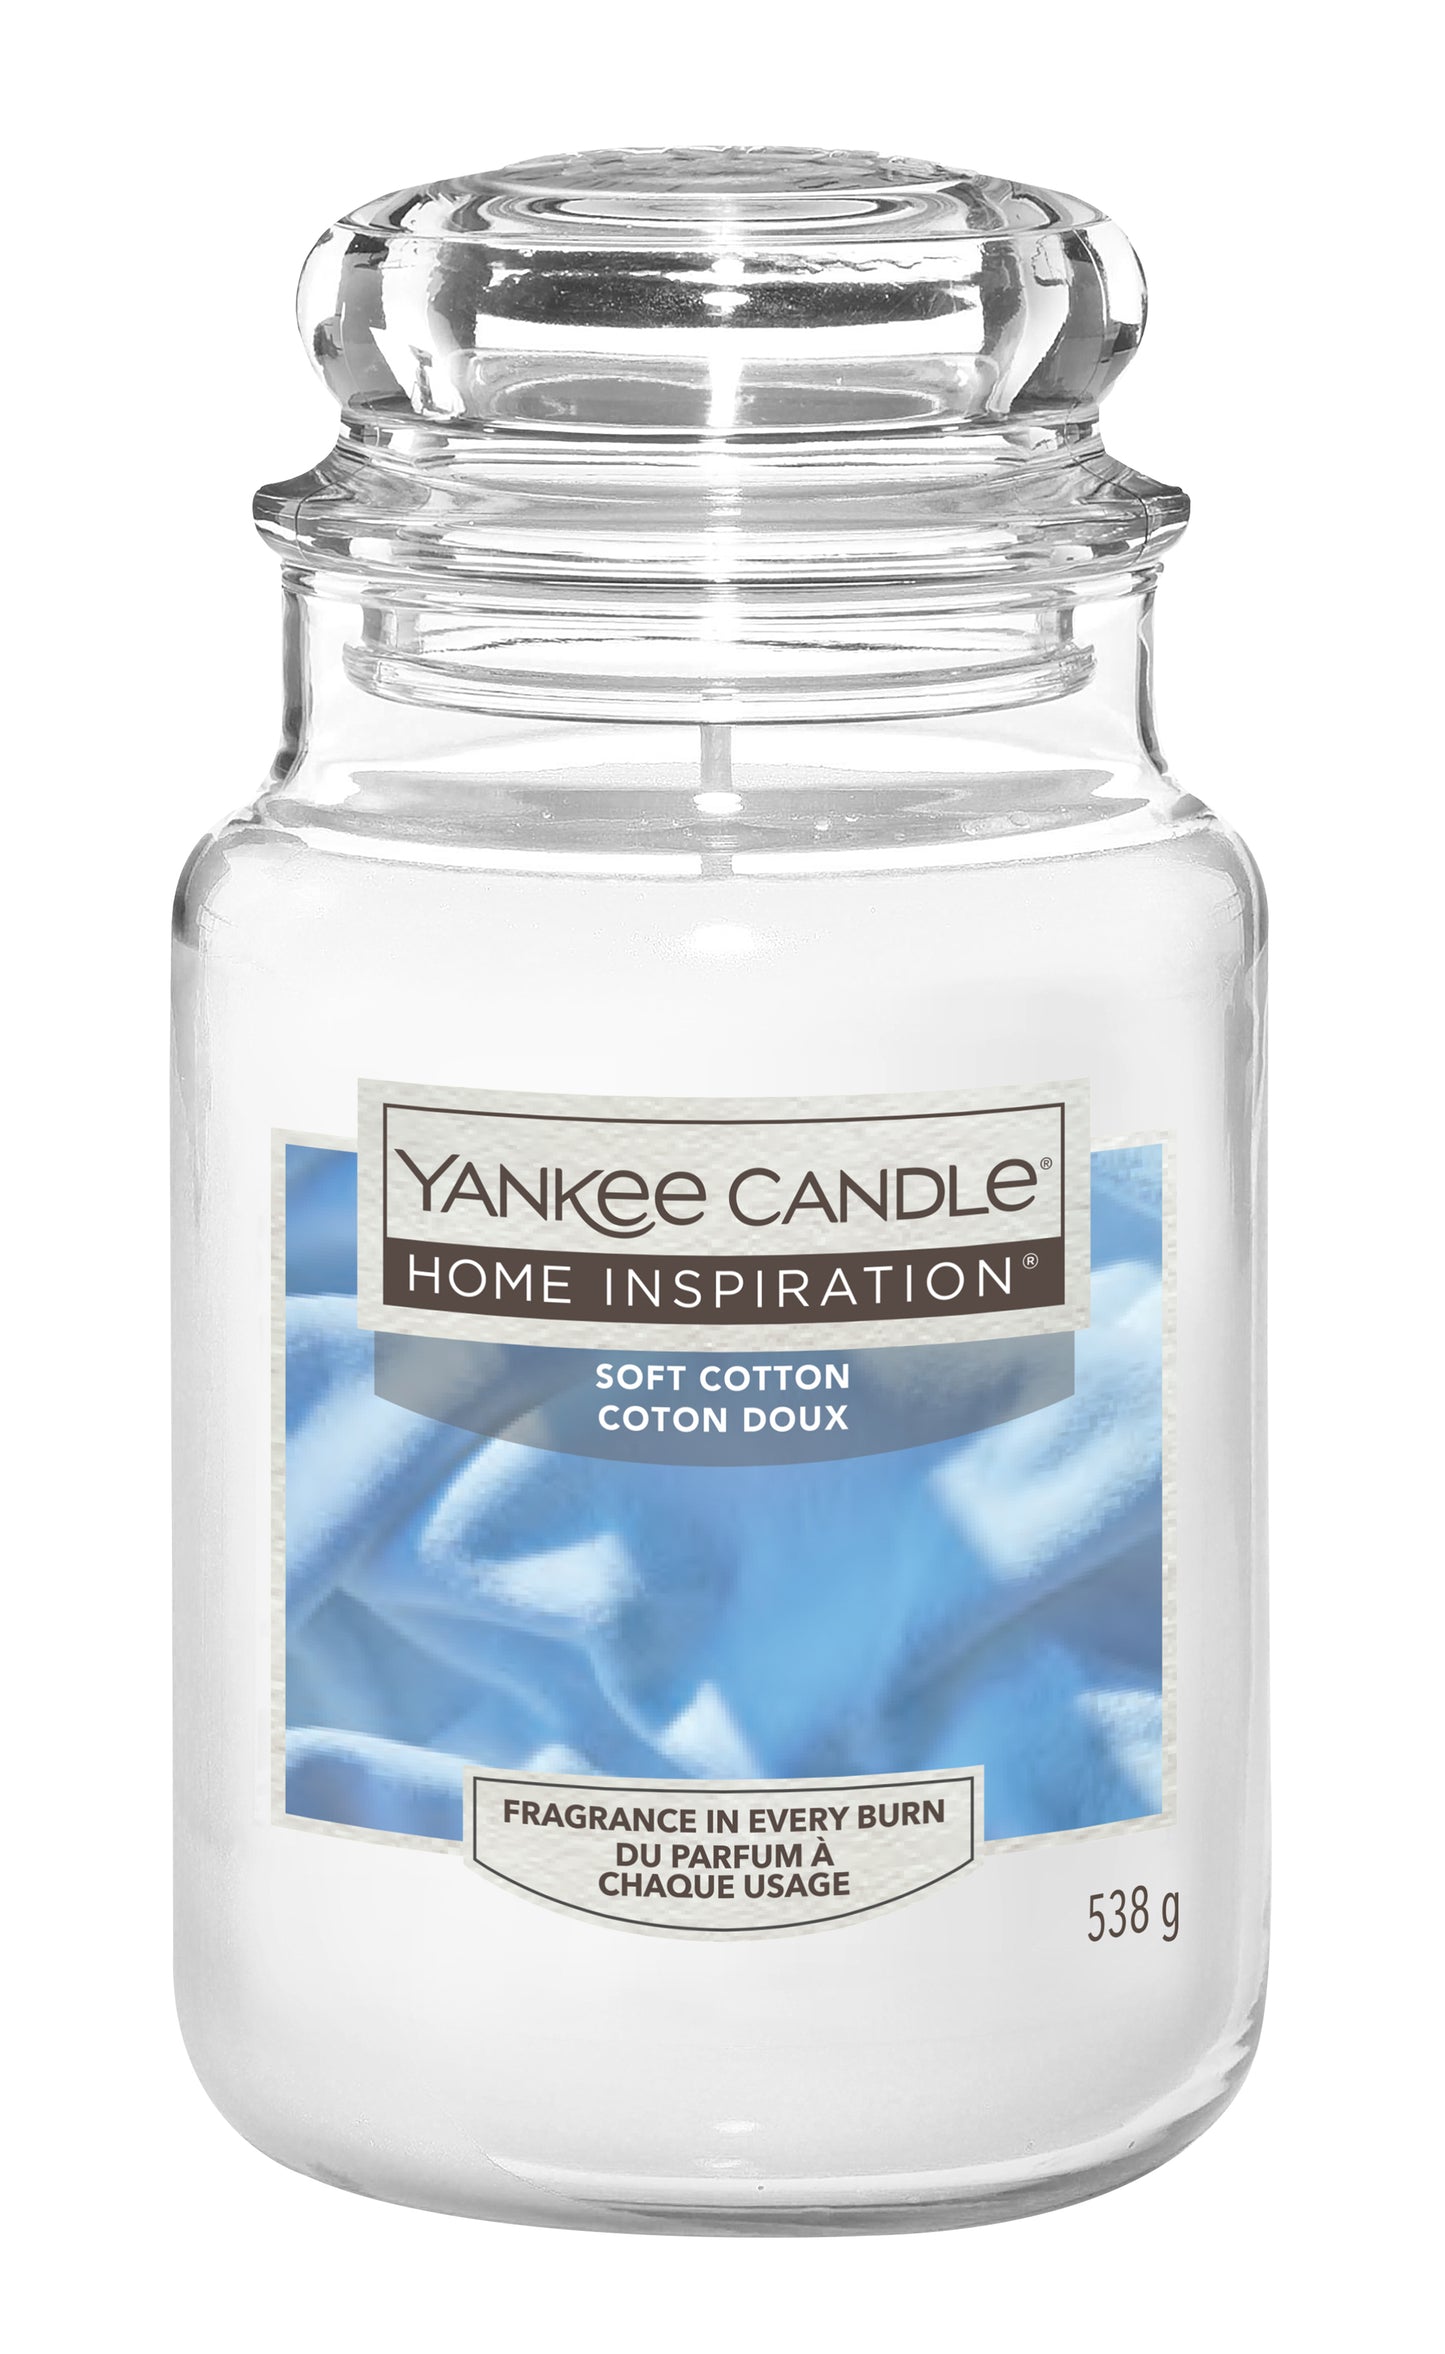 Soft Cotton Large Jar Yankee Candle® Home Inspiration® Soft Cotton provides a fresh and airy aroma throughout your home, such as the clean, comforting scent of soft, fluffy towels just out of the dryer. 